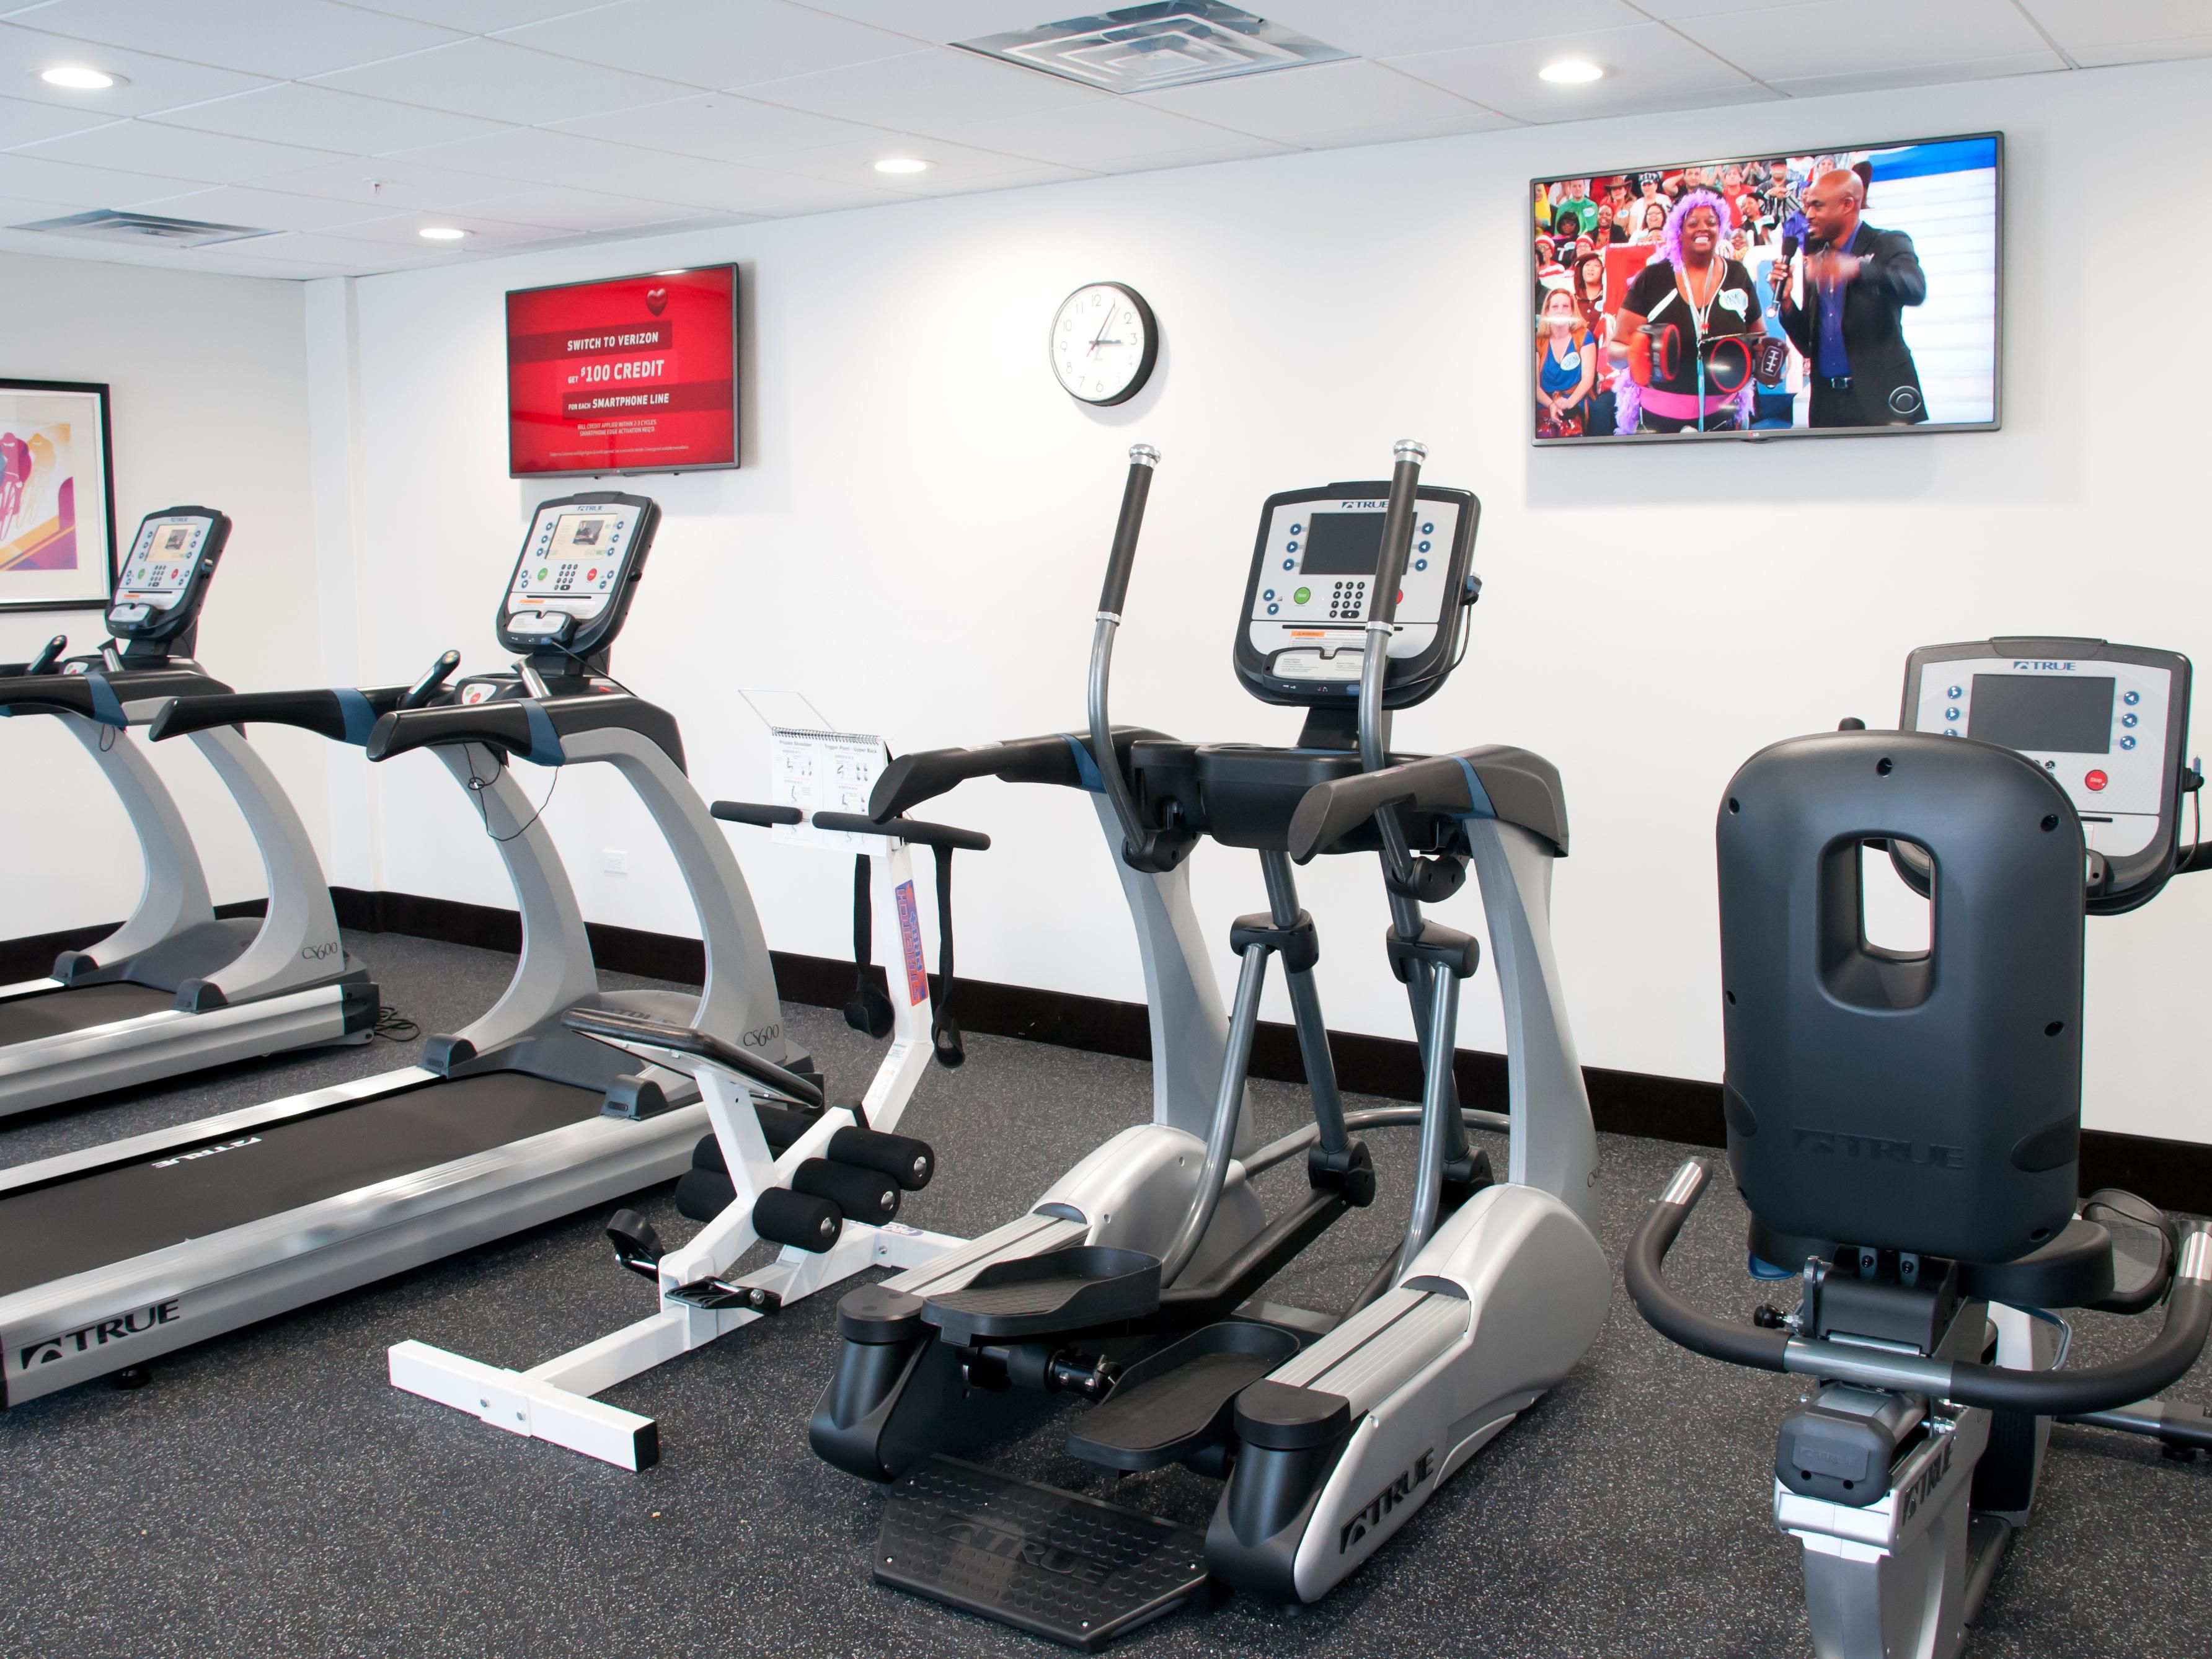 Stay motivated while away from home in the state-of-the-art Fitness Center at our Savannah hotel. Start your day with an energizing workout in our 24-hour gym with cardio and equipment, including treadmills, elliptical machines, a stair stepper, and stationary and recumbent bikes.